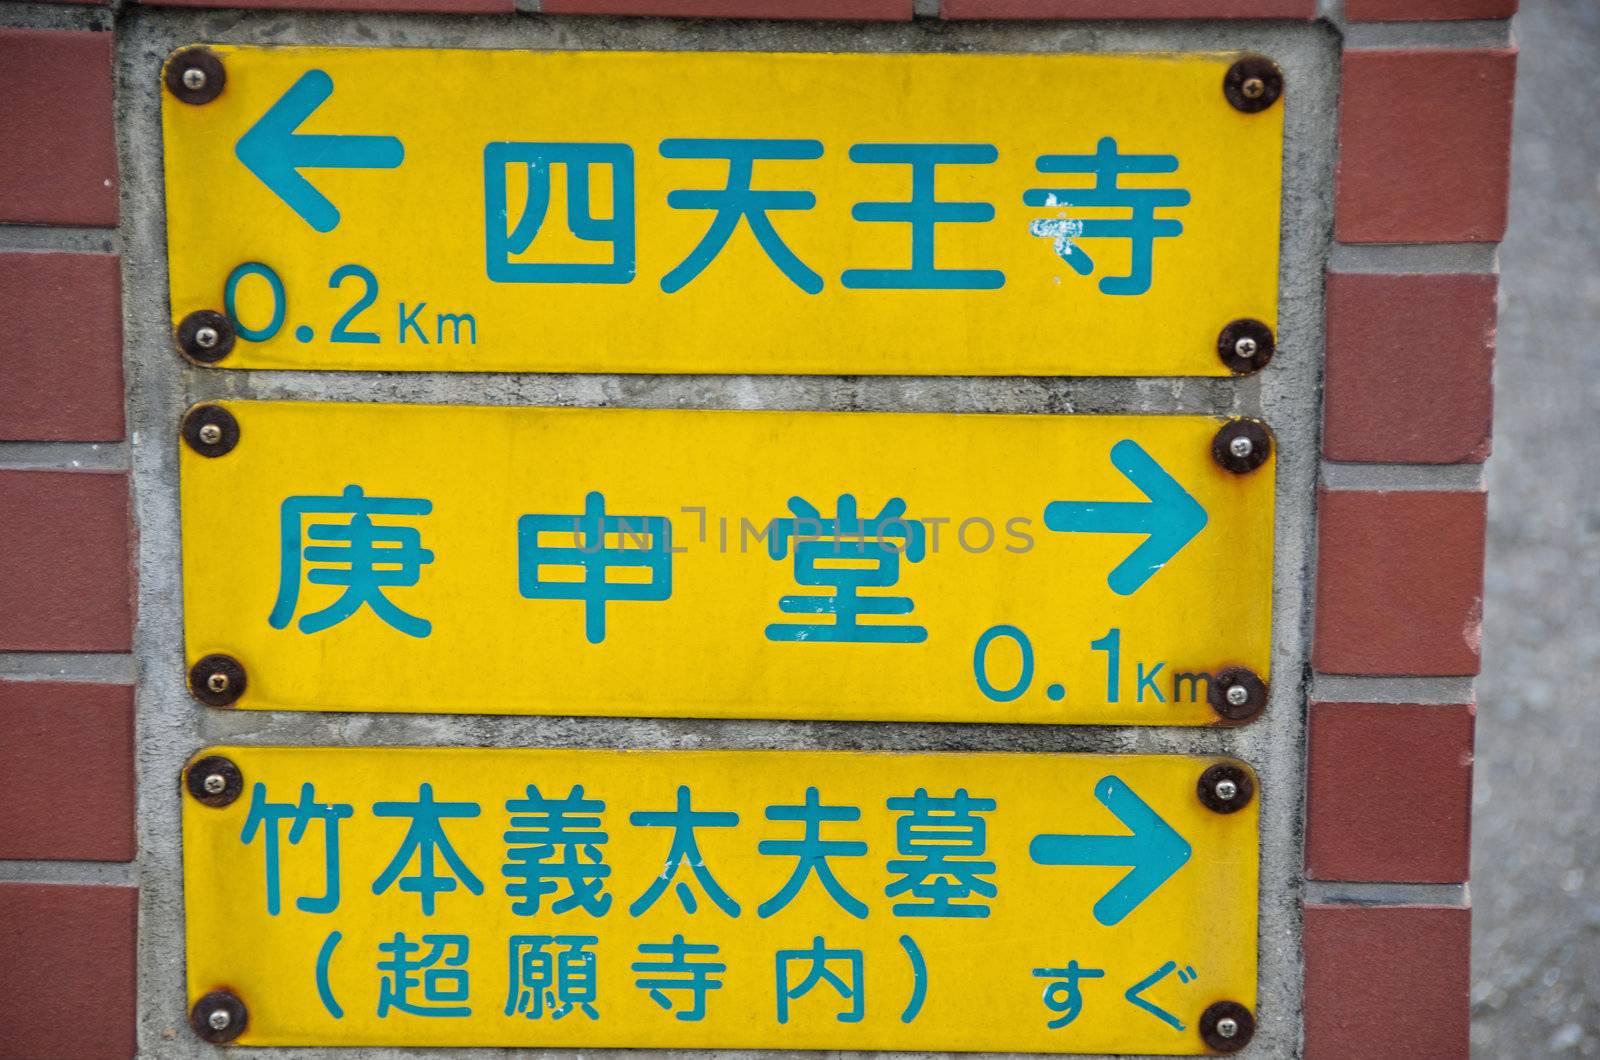 Japanese street signs for pedastrians by Arrxxx